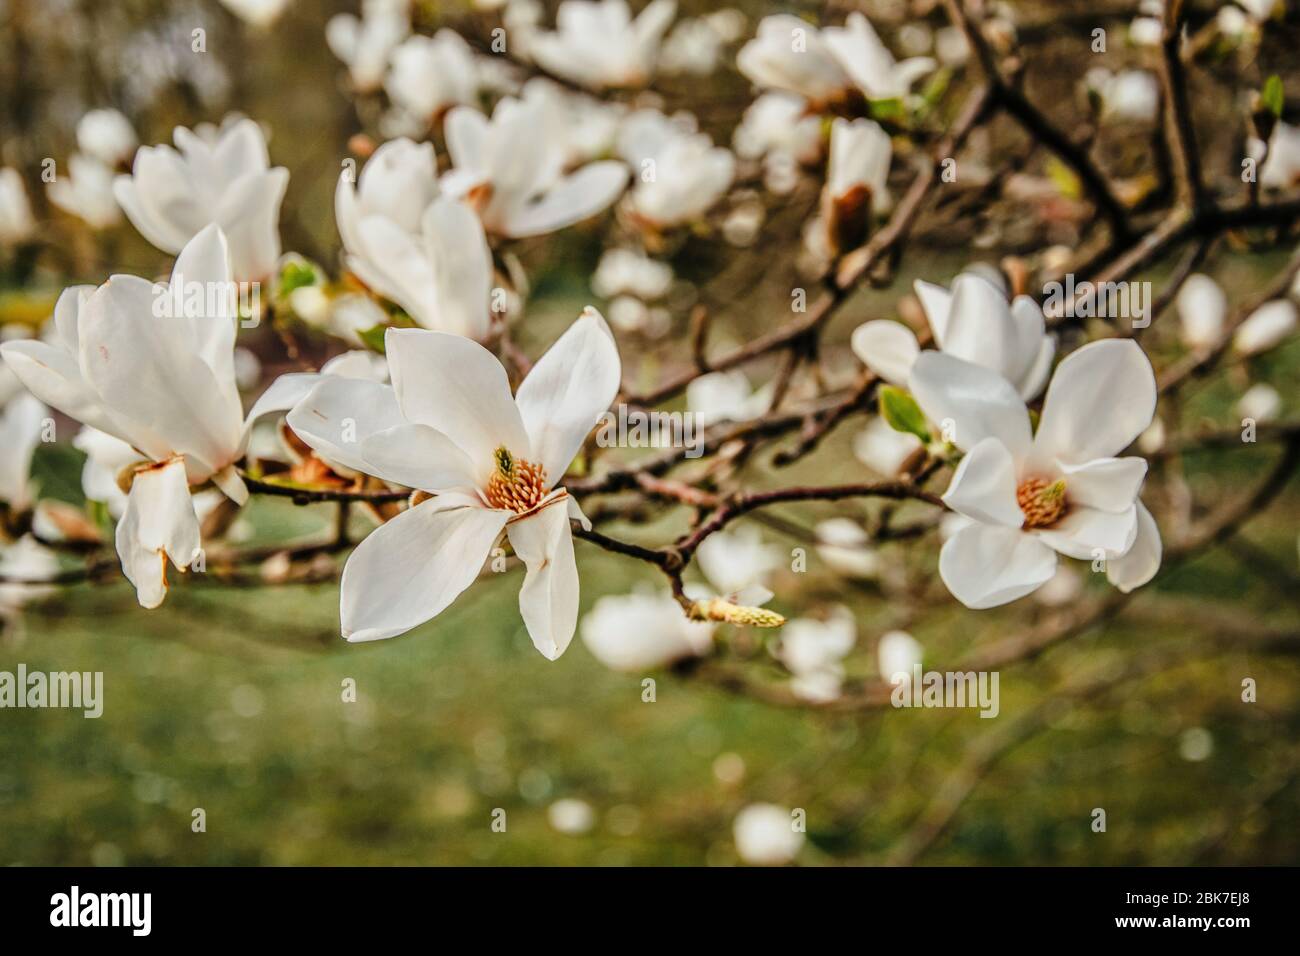 Kobus Magnolia tree blooming with white flowers in early spring Stock Photo